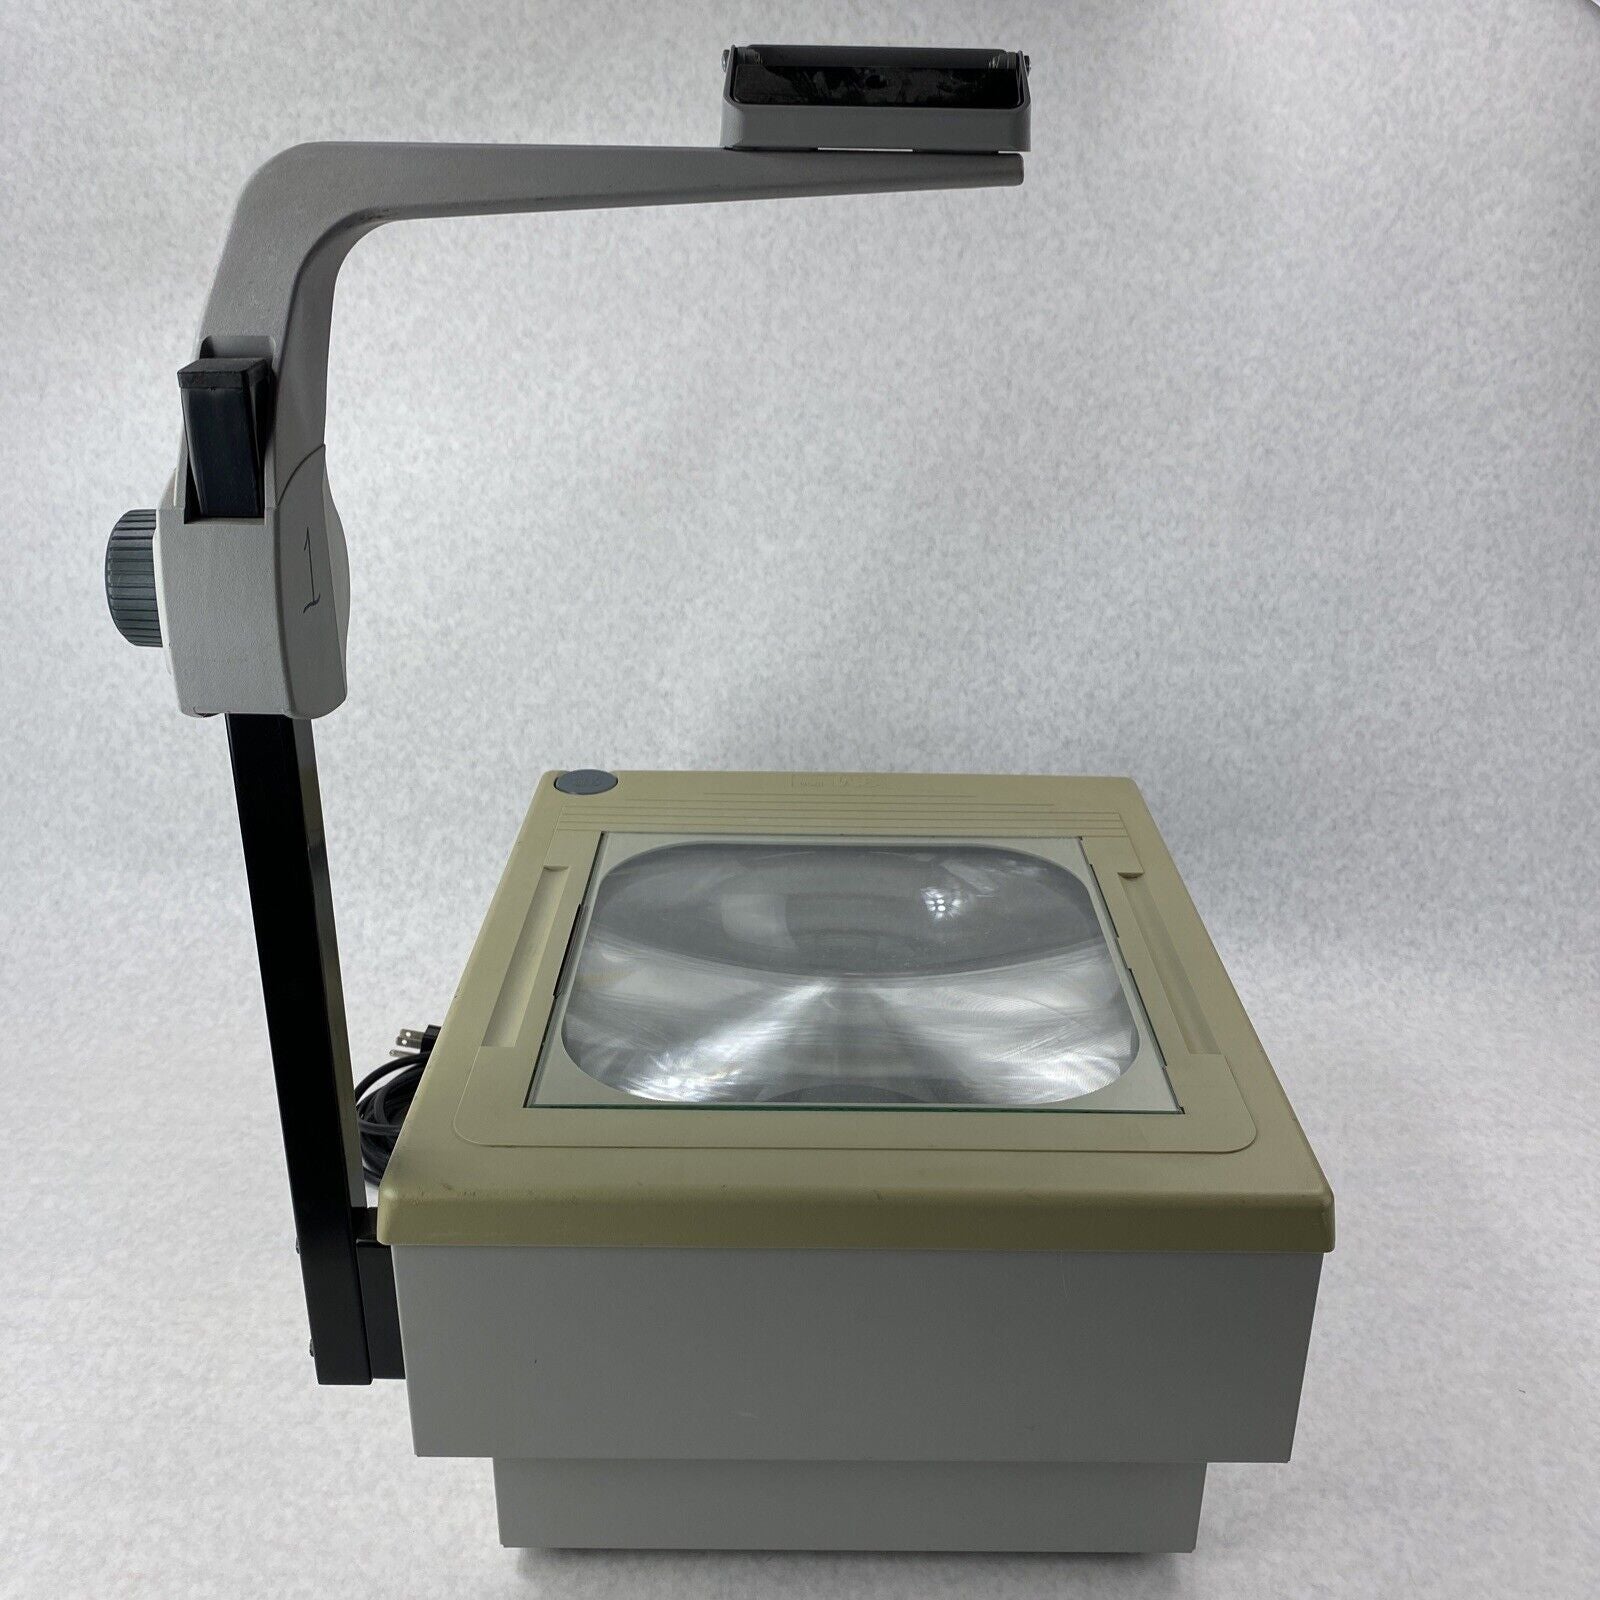 3M 1700 Series Overhead Projector w/ Transparency Film